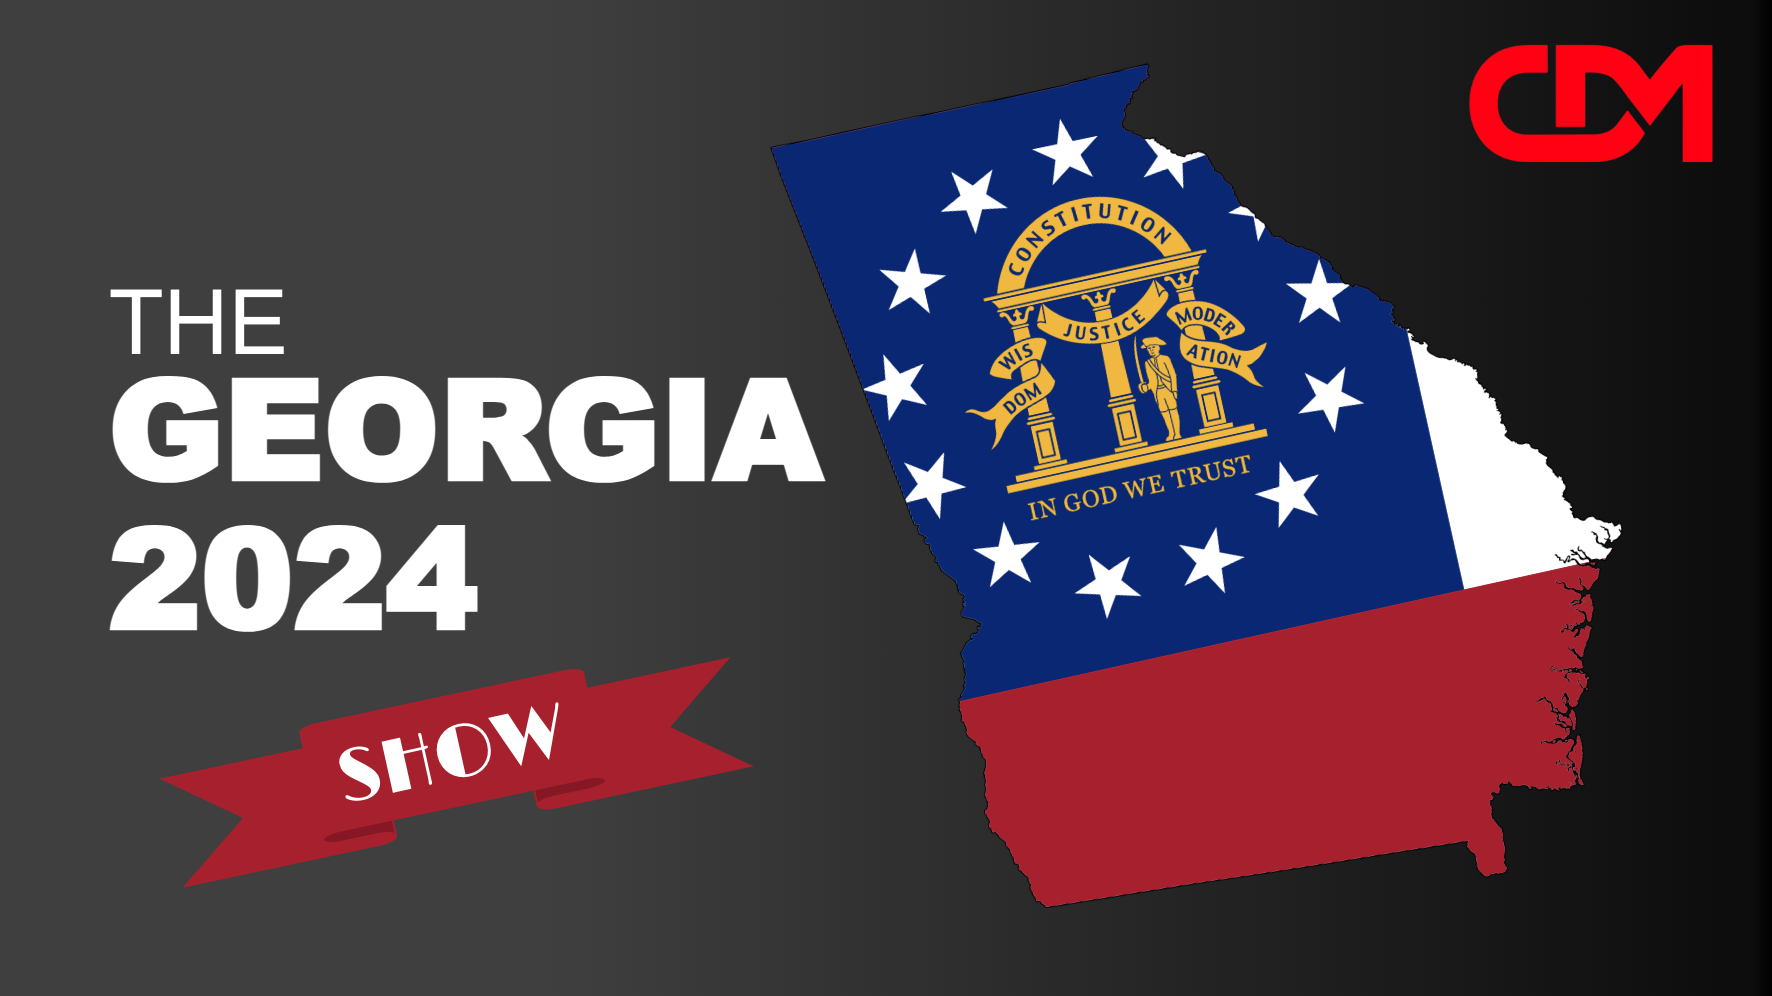 LIVE 2pm EST: The Georgia 2024 Show With Chris Gleason, Foster Coulson, BKP